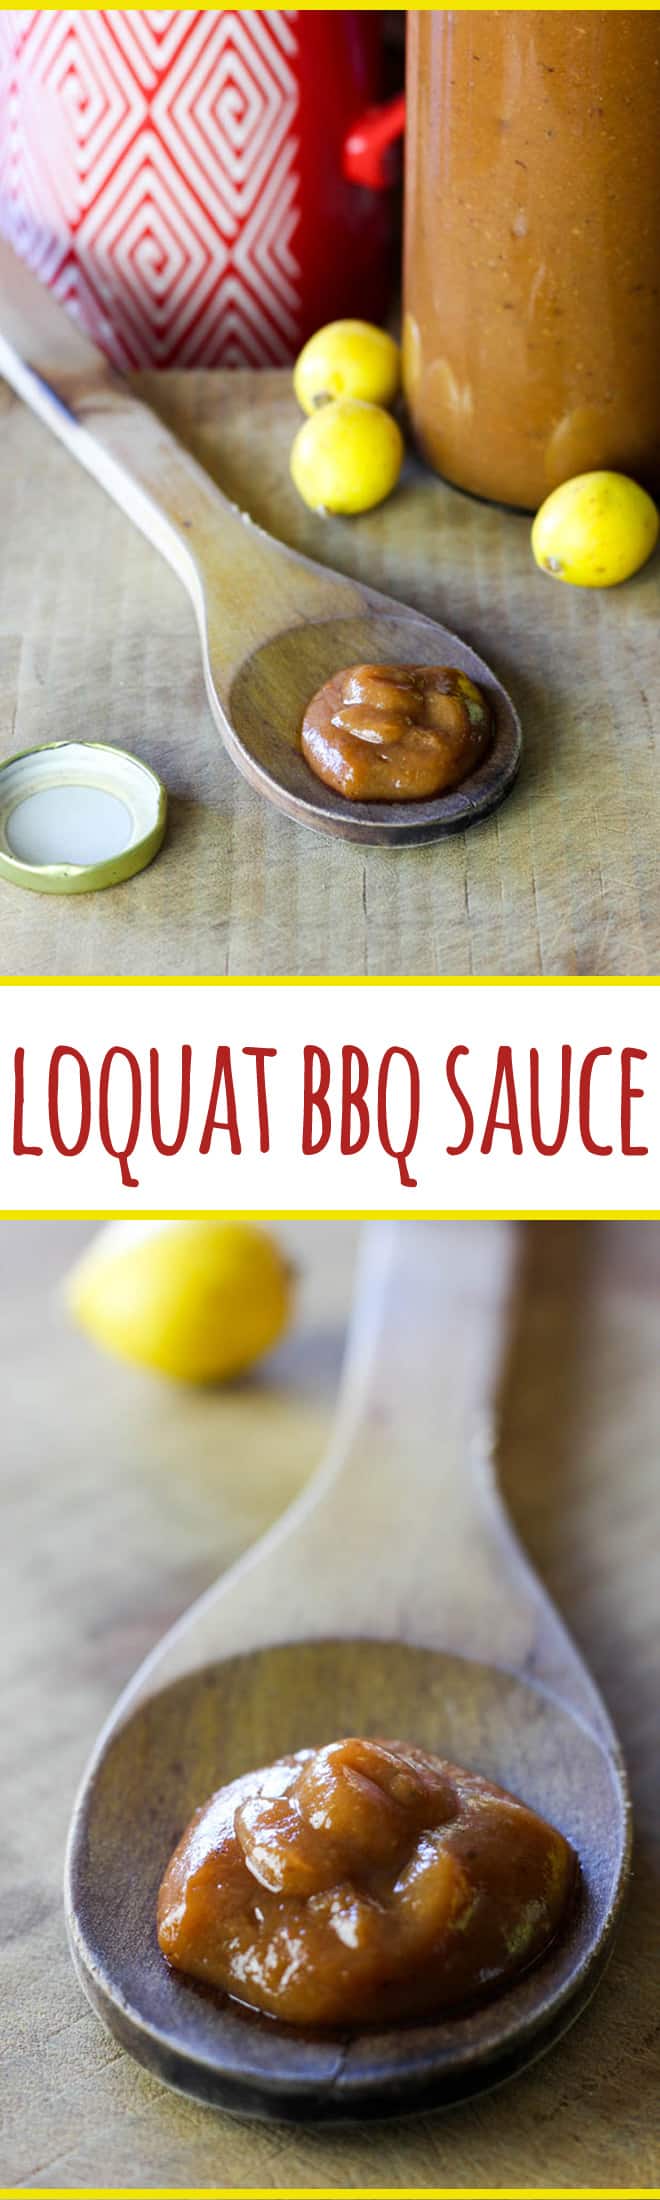 A sharp, tangy and spicy bbq sauce recipe to use up that seasonal glut of loquats.